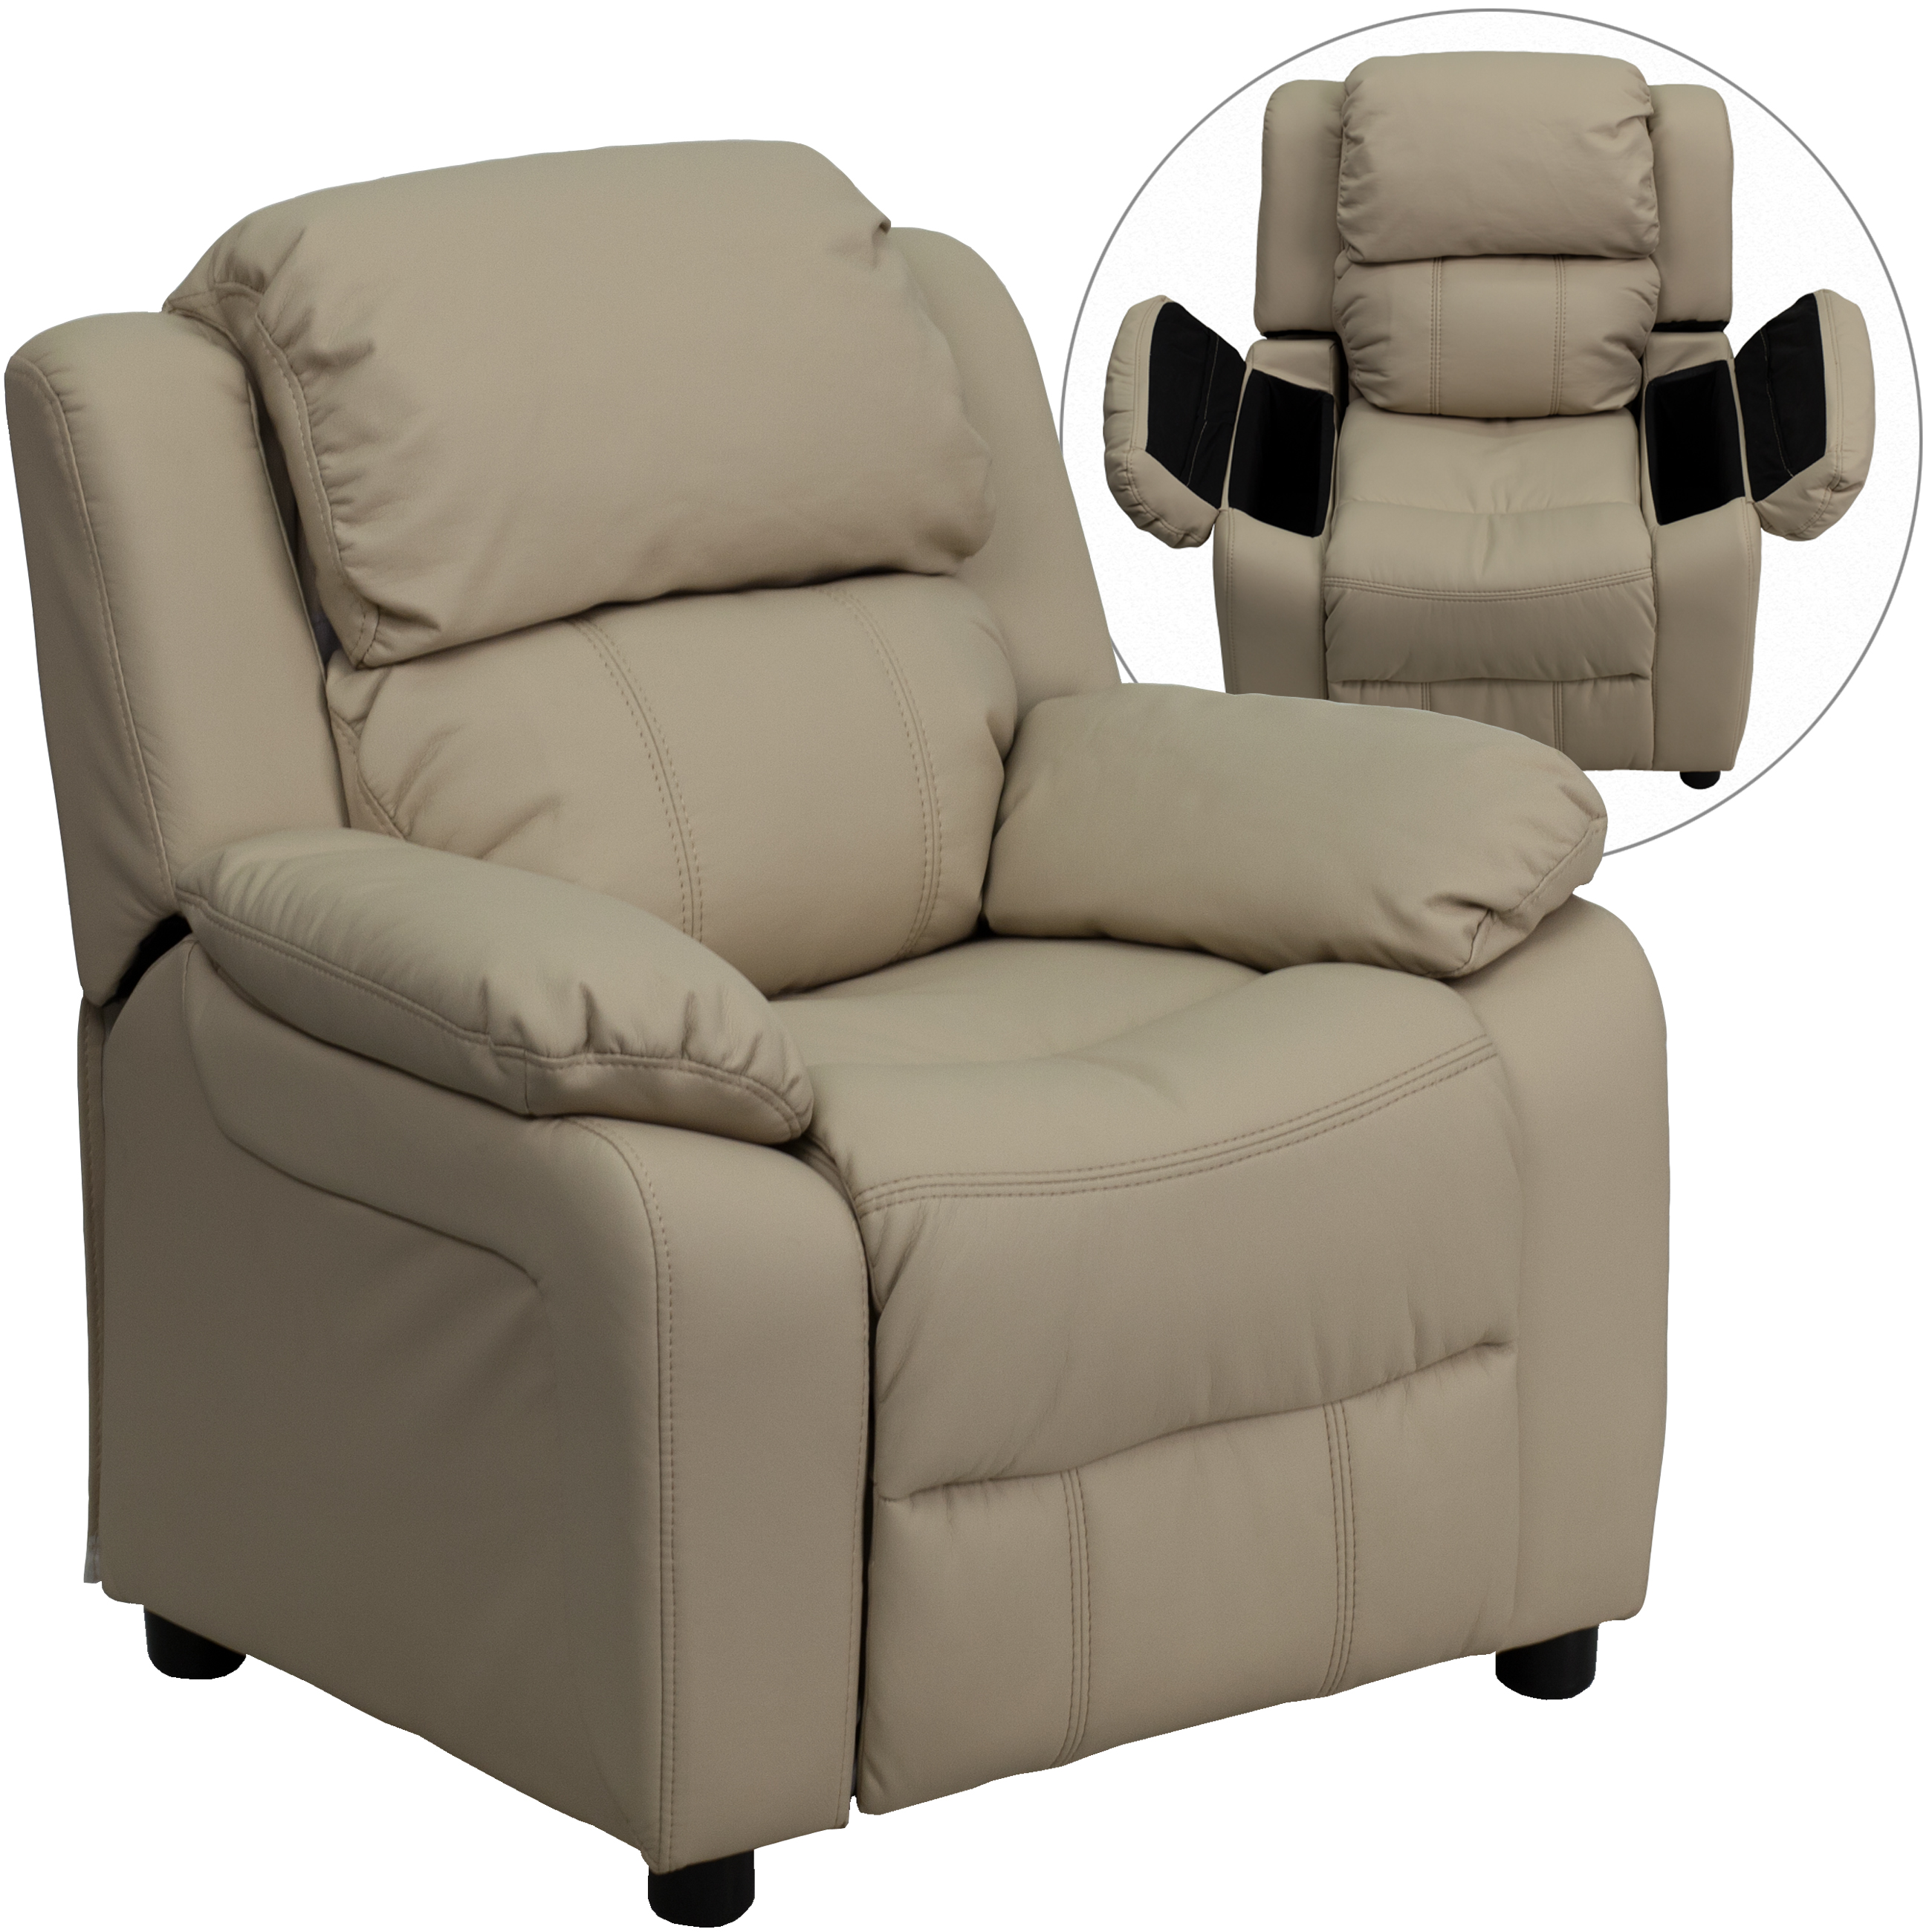 Flash Furniture Deluxe Padded Contemporary Beige Vinyl Kids Recliner with Storage Arms - image 1 of 13